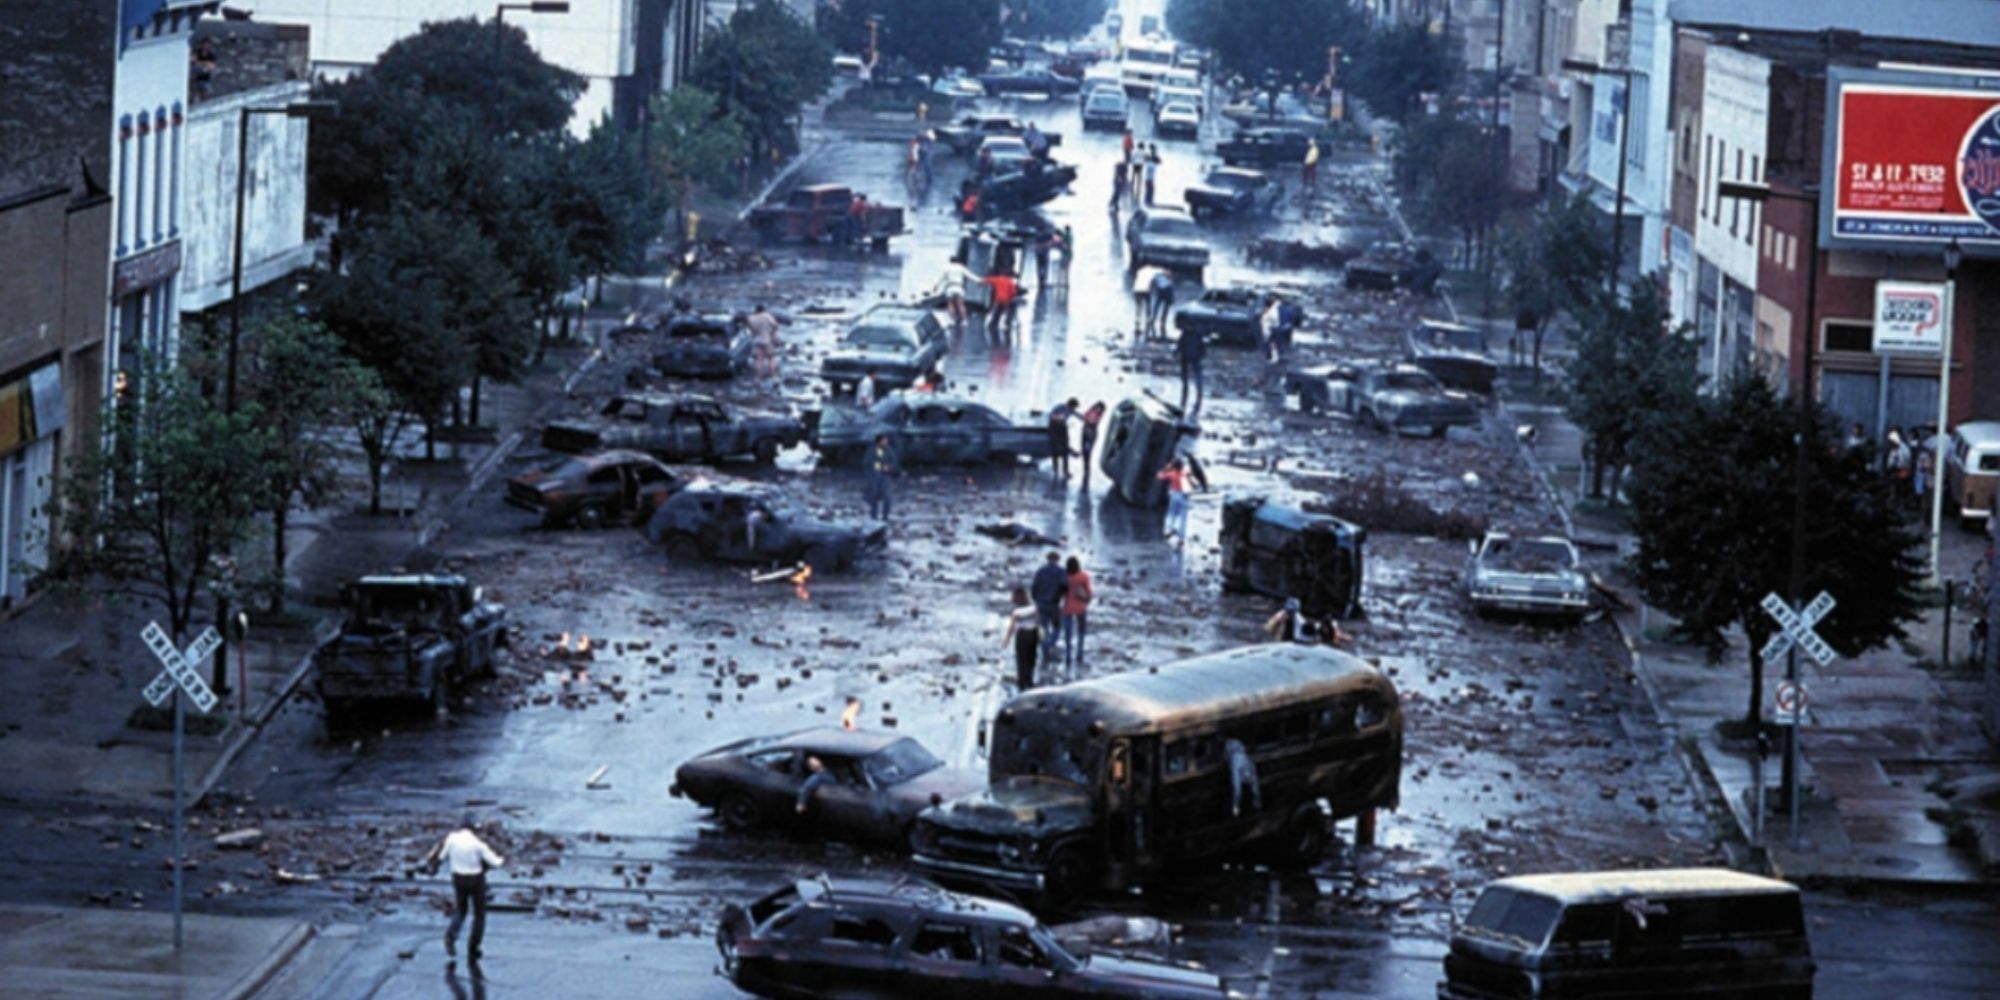 City streets are littered with car wrecks and debris in the aftermath of a nuclear strike